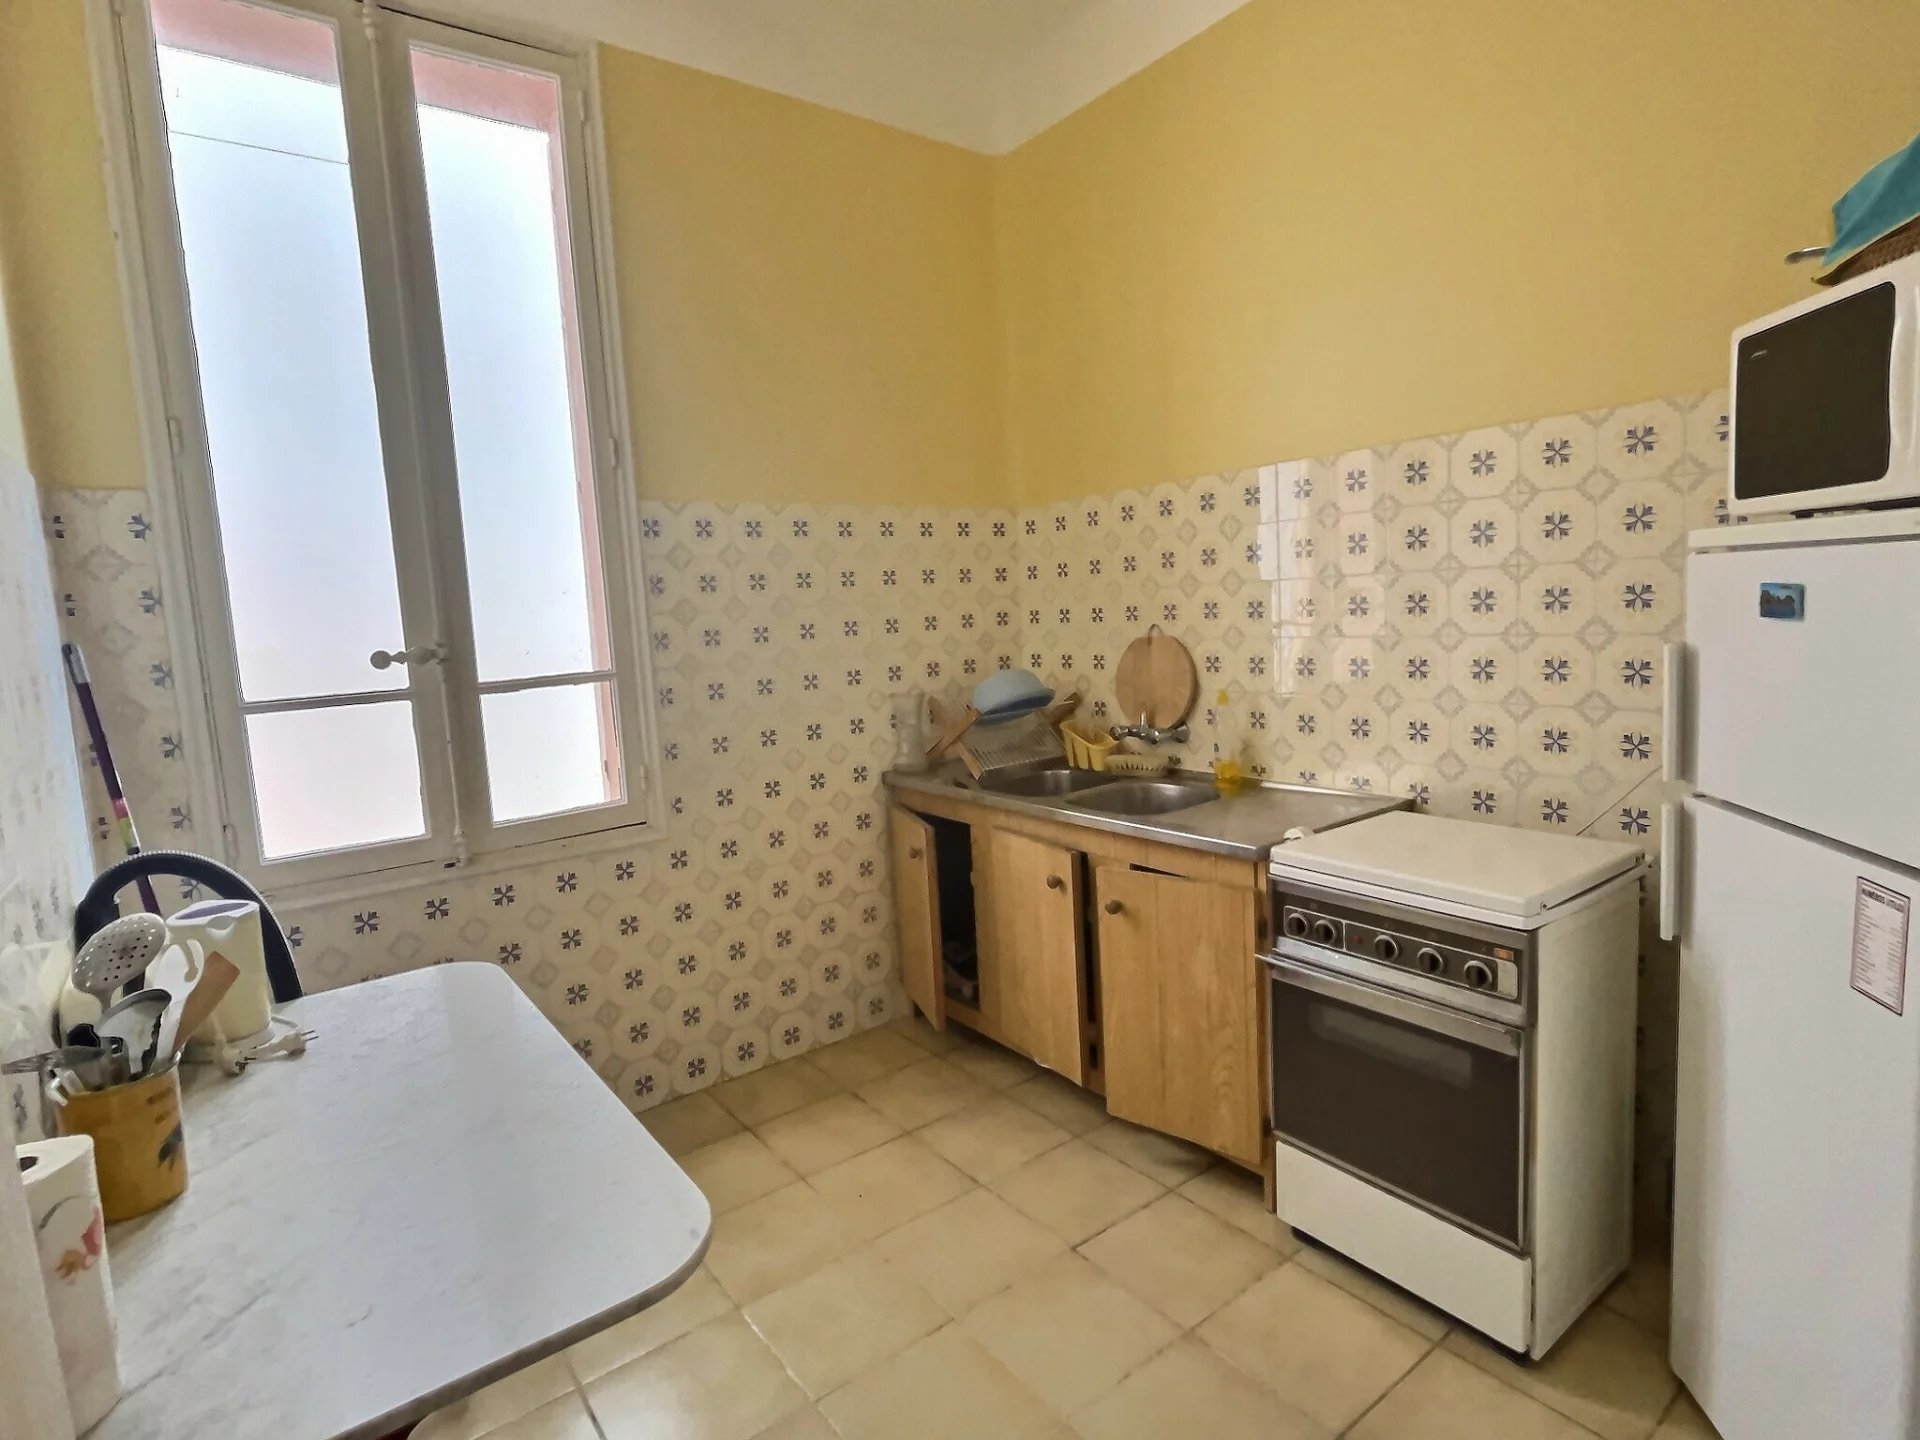 For sale Flat to renovate in the Ilette area